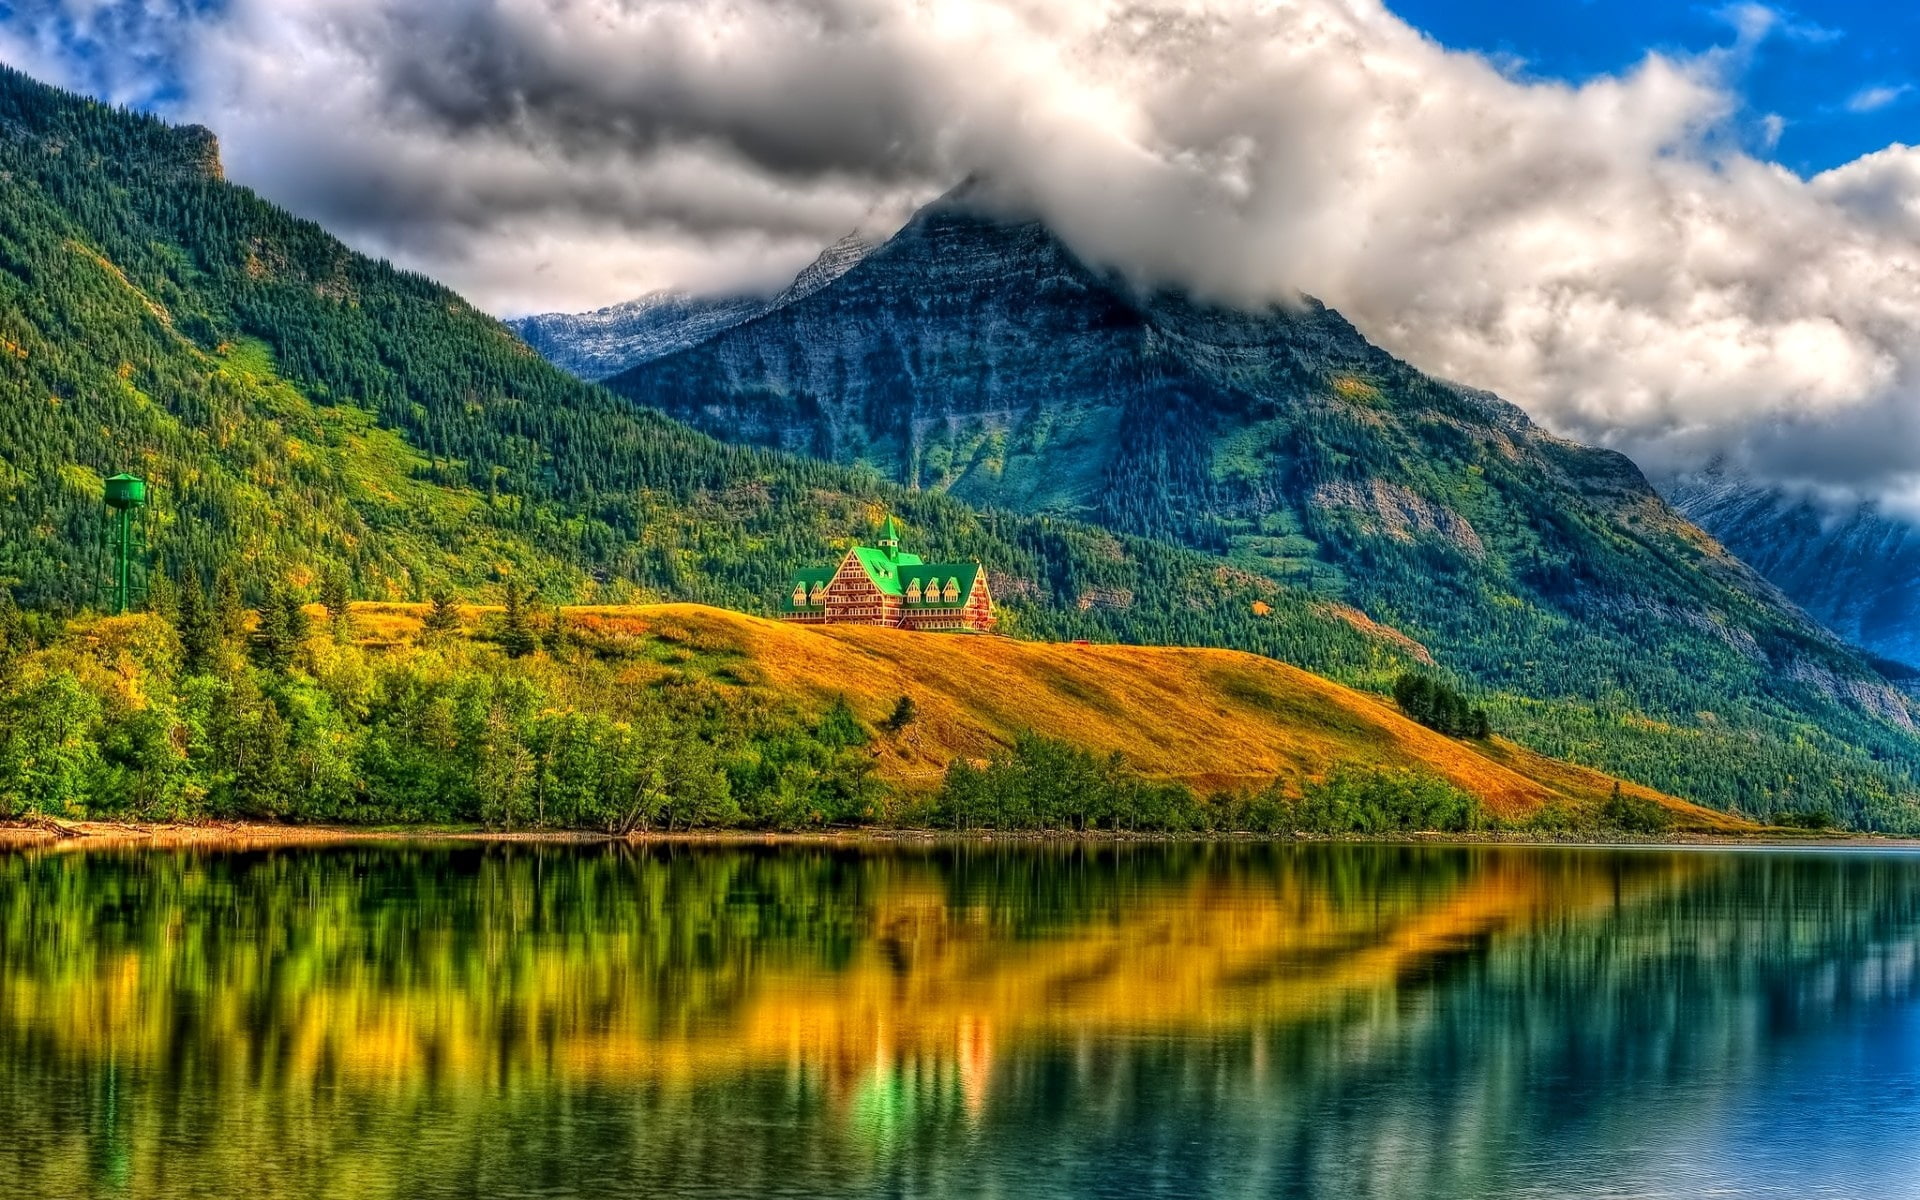 Clouds, mountains, house, forest, trees, lake, water reflection